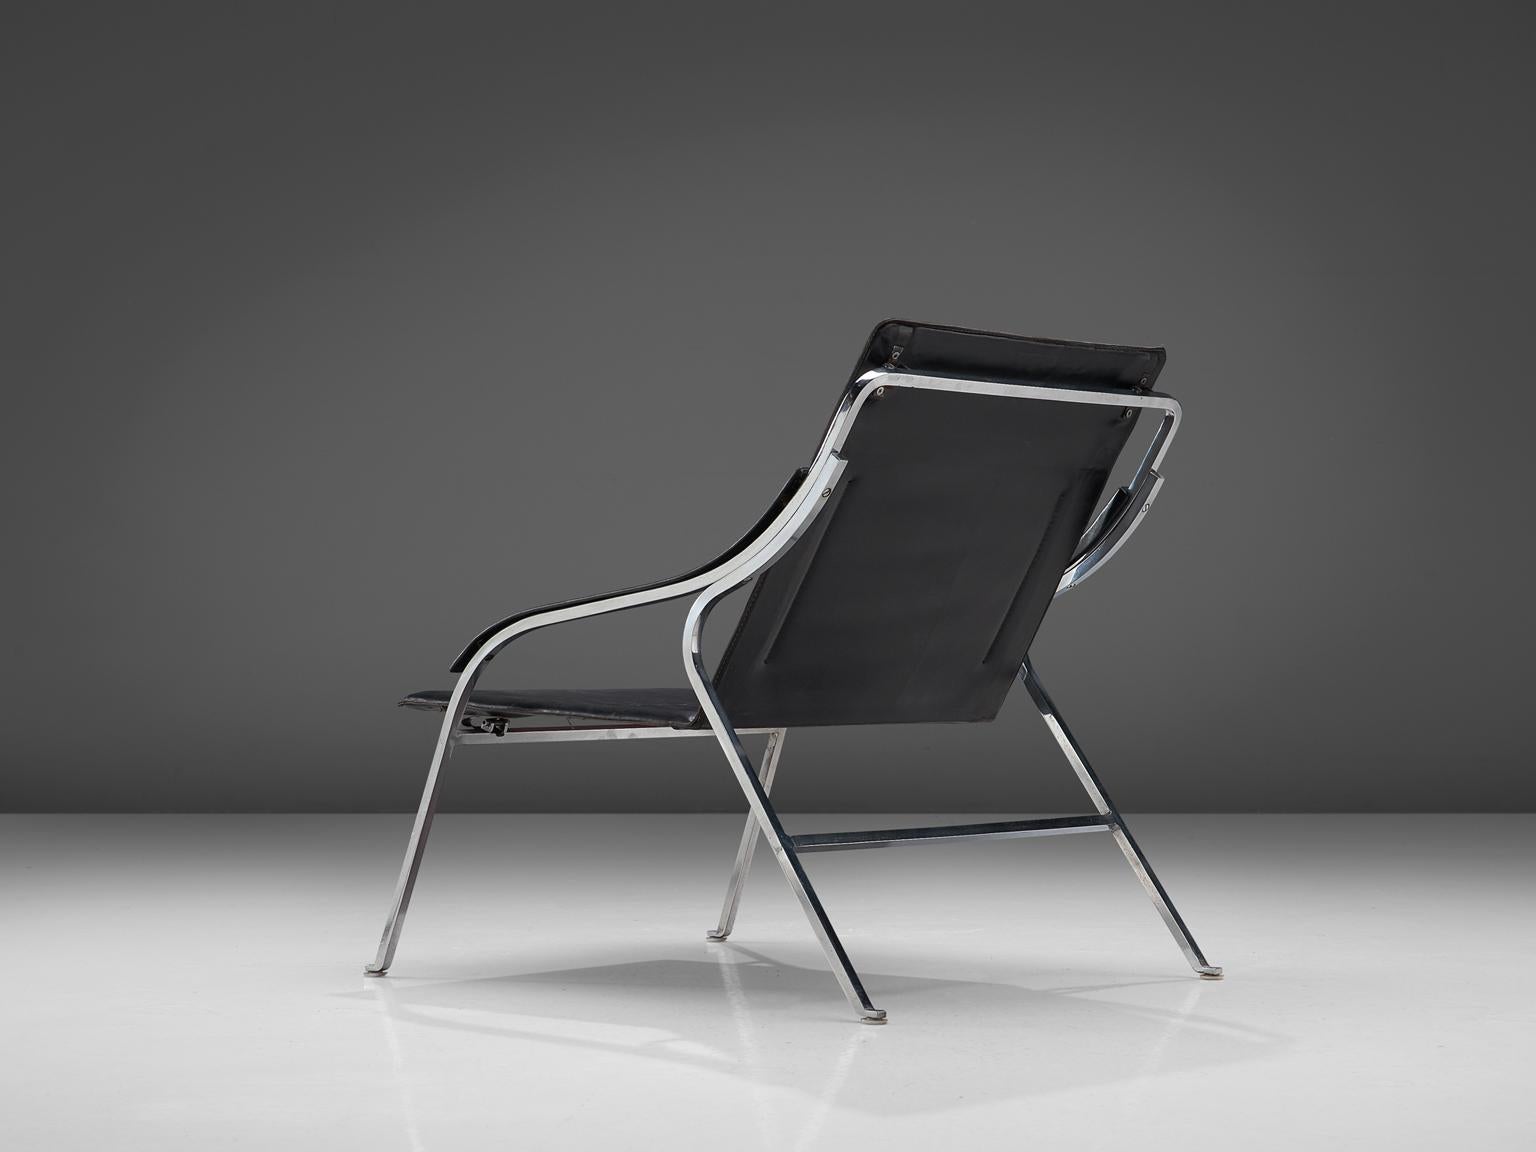 Marco Zanuso for Arflex, black leather and steel, Italy, 1964.

This lounge chair by Zanuso remains among the best examples of armchairs designed by the architect. It is not only the ingenious slender design that distinguishes it, but also the